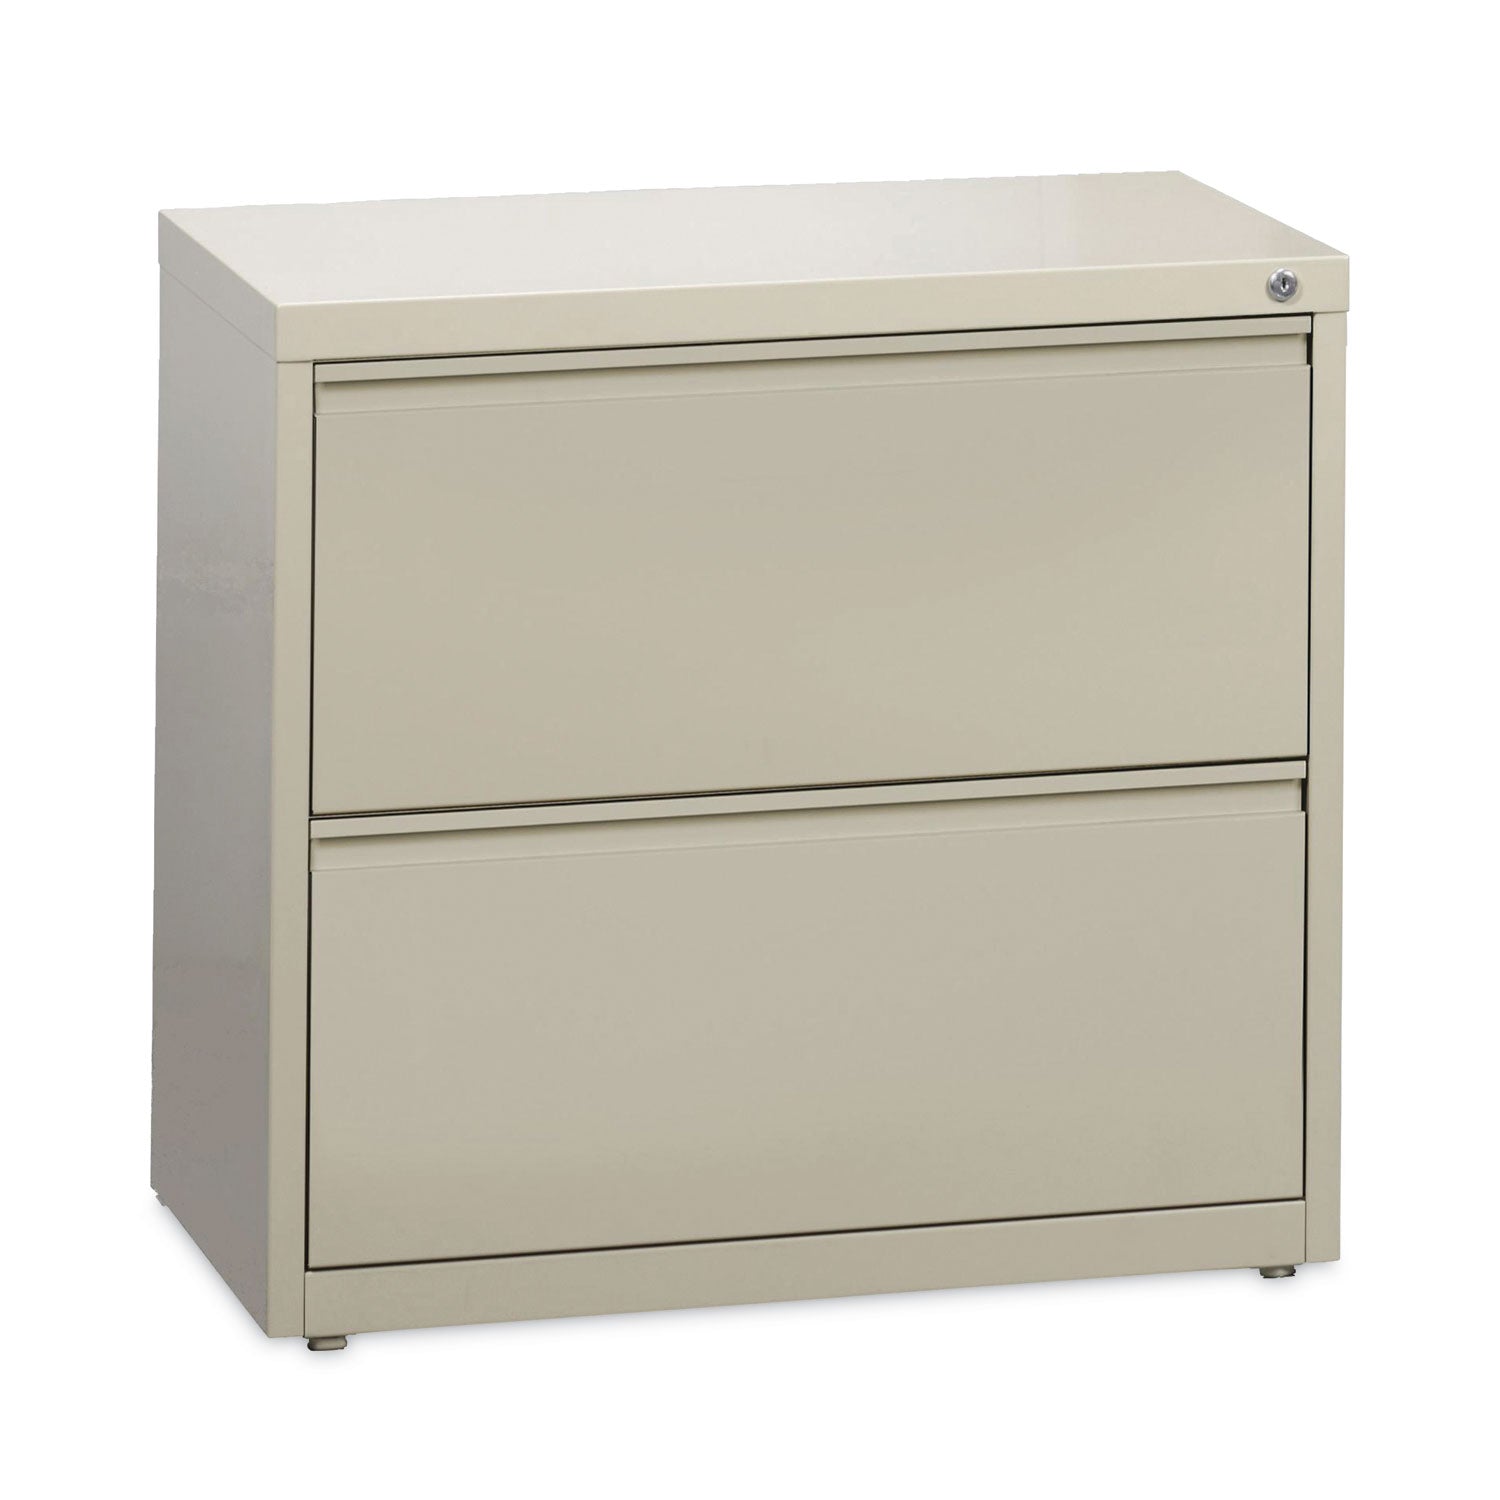 lateral-file-cabinet-2-letter-legal-a4-size-file-drawers-putty-30-x-1862-x-28_hid14970 - 1